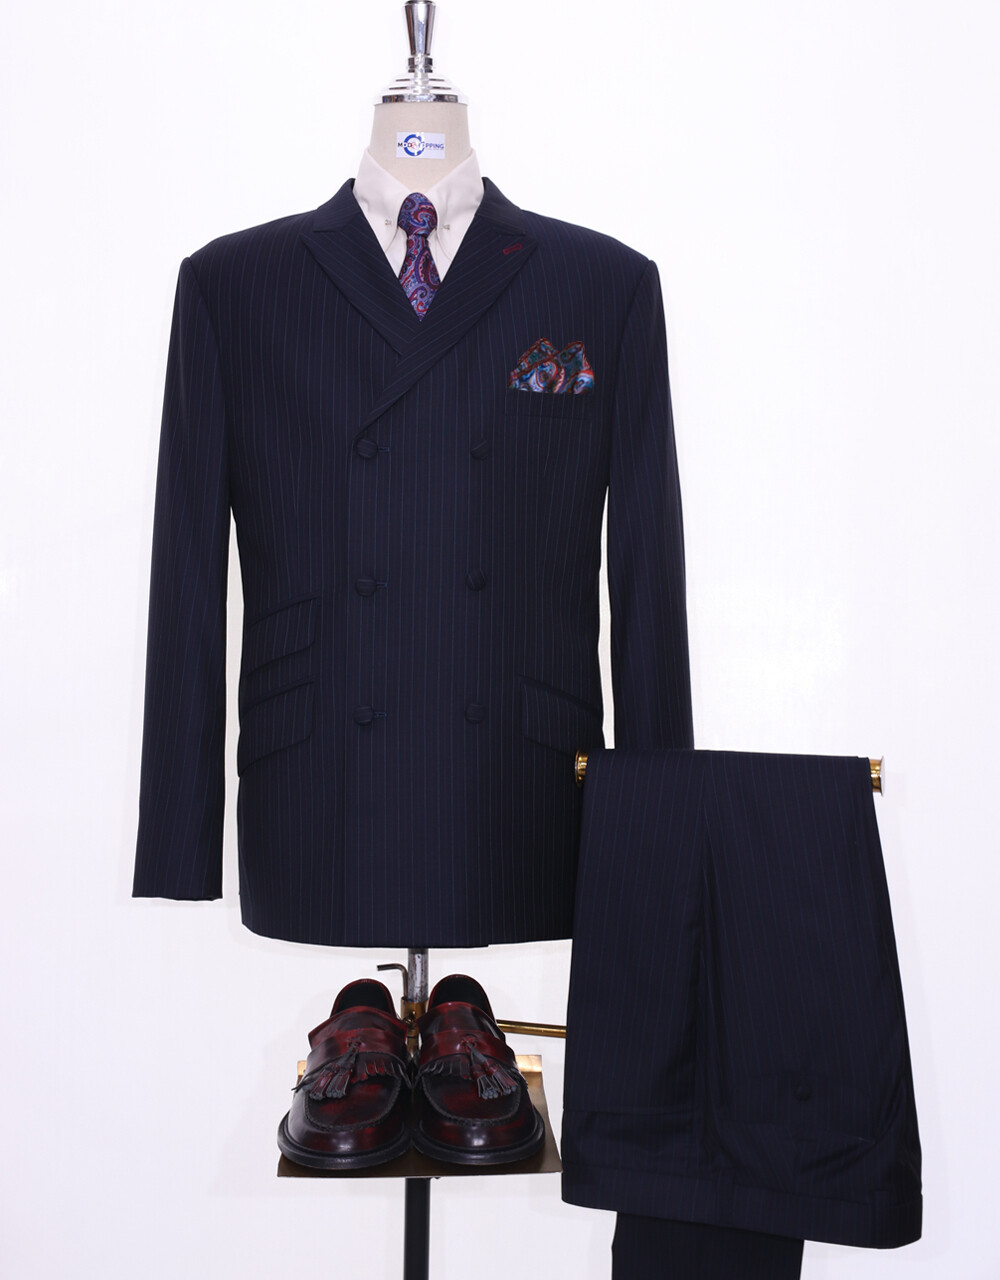 Double Breasted Navy Blue Striped Suit Jacket 40R & 34/32 Trouser